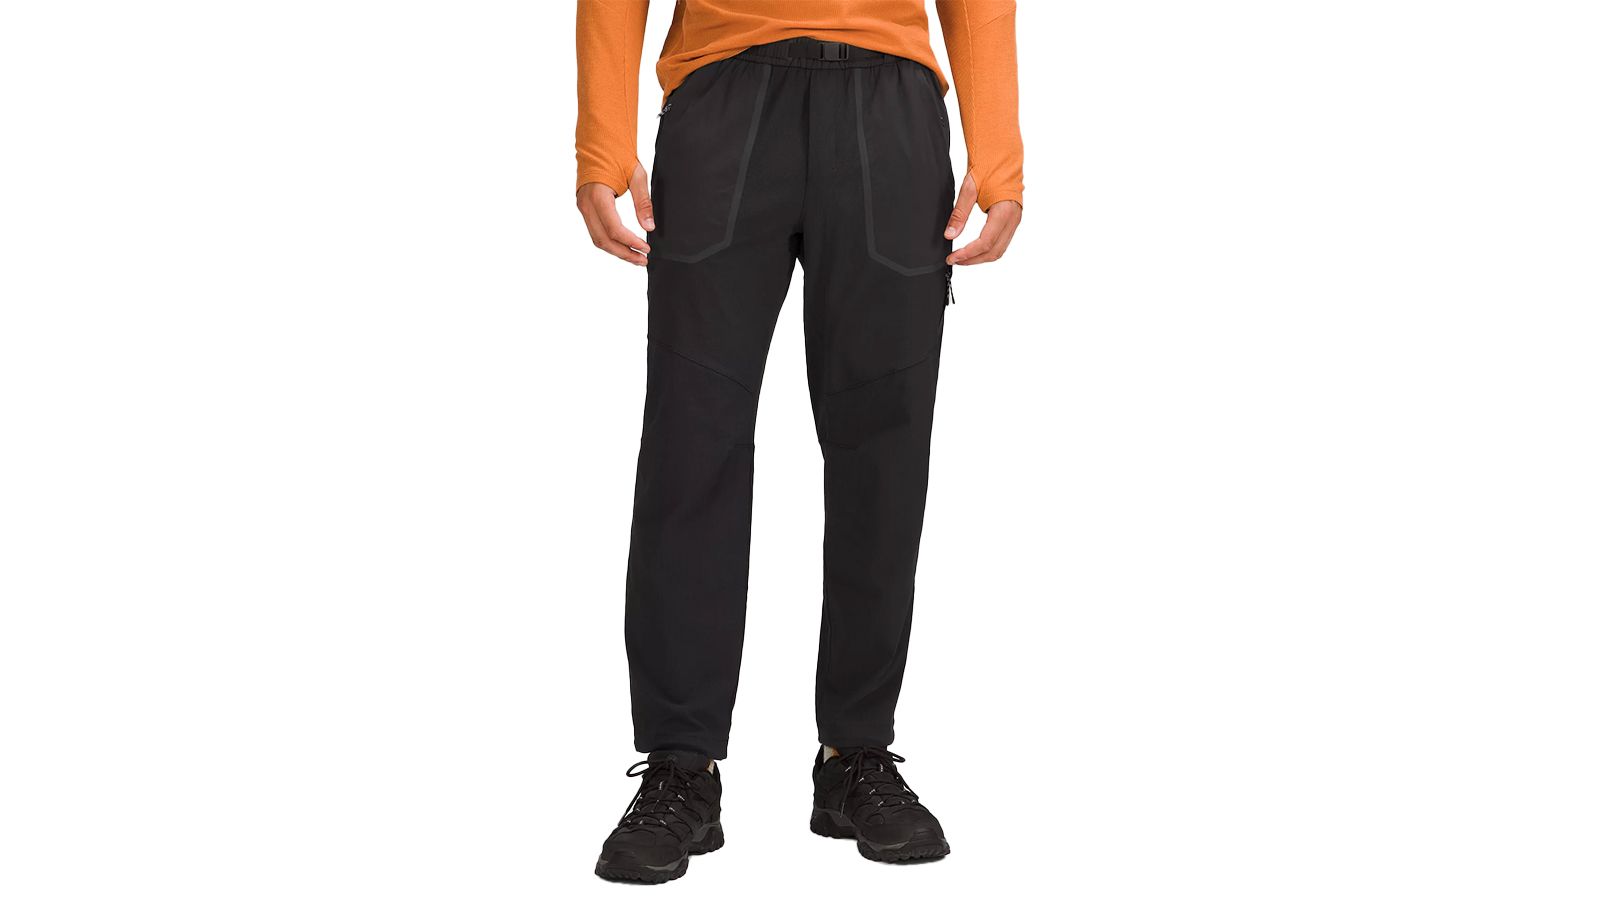 These Hiking Pants Are Still 30% Off